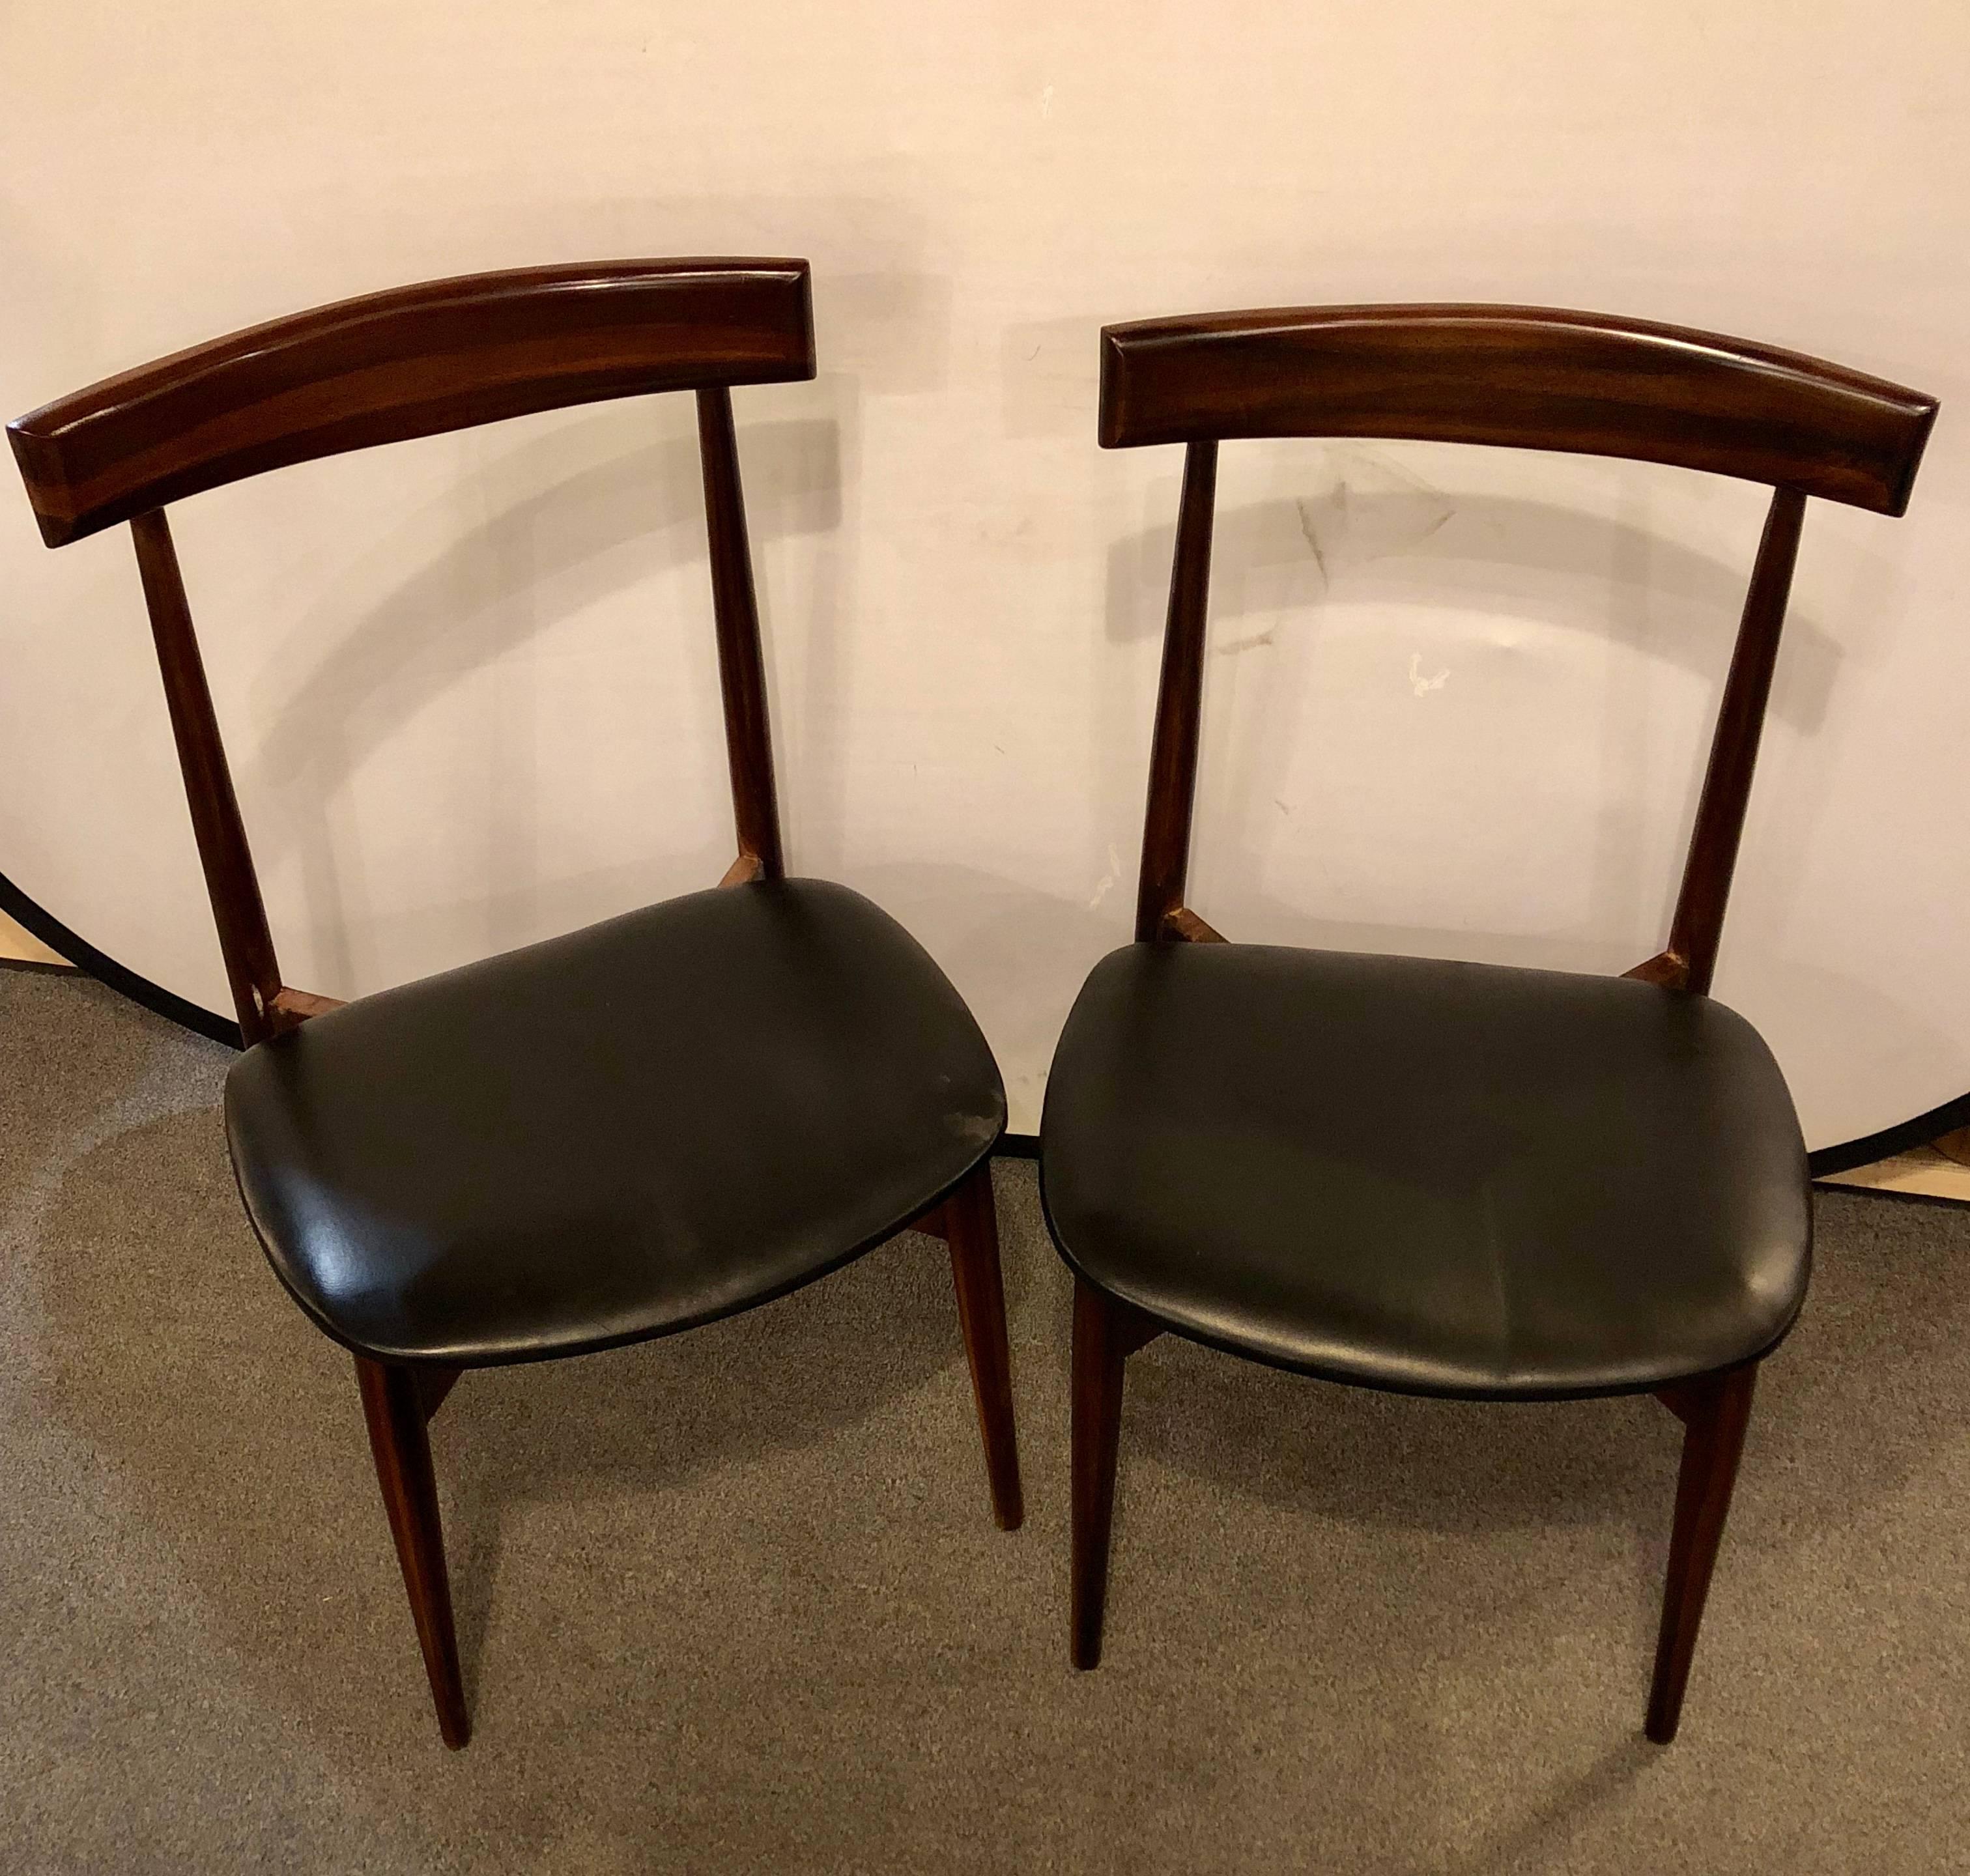 Set of ten Mid-Century Modern slat back black leather dining chairs. Each in a rosewood finish with new seat cushions.